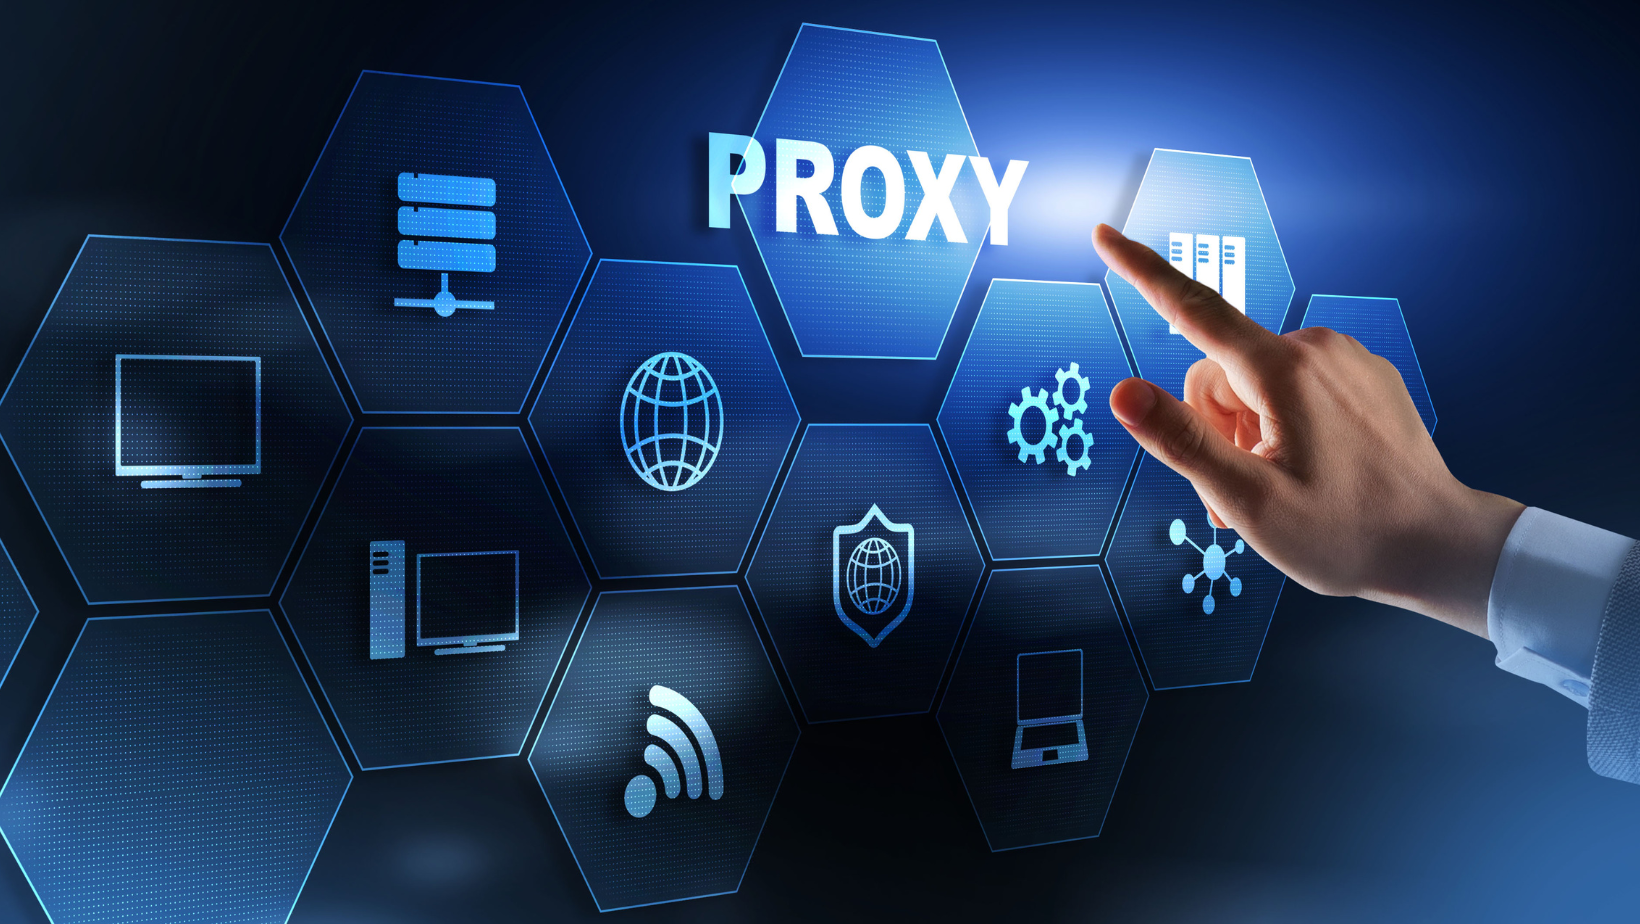 Use proxy to extract information in web scraping industry